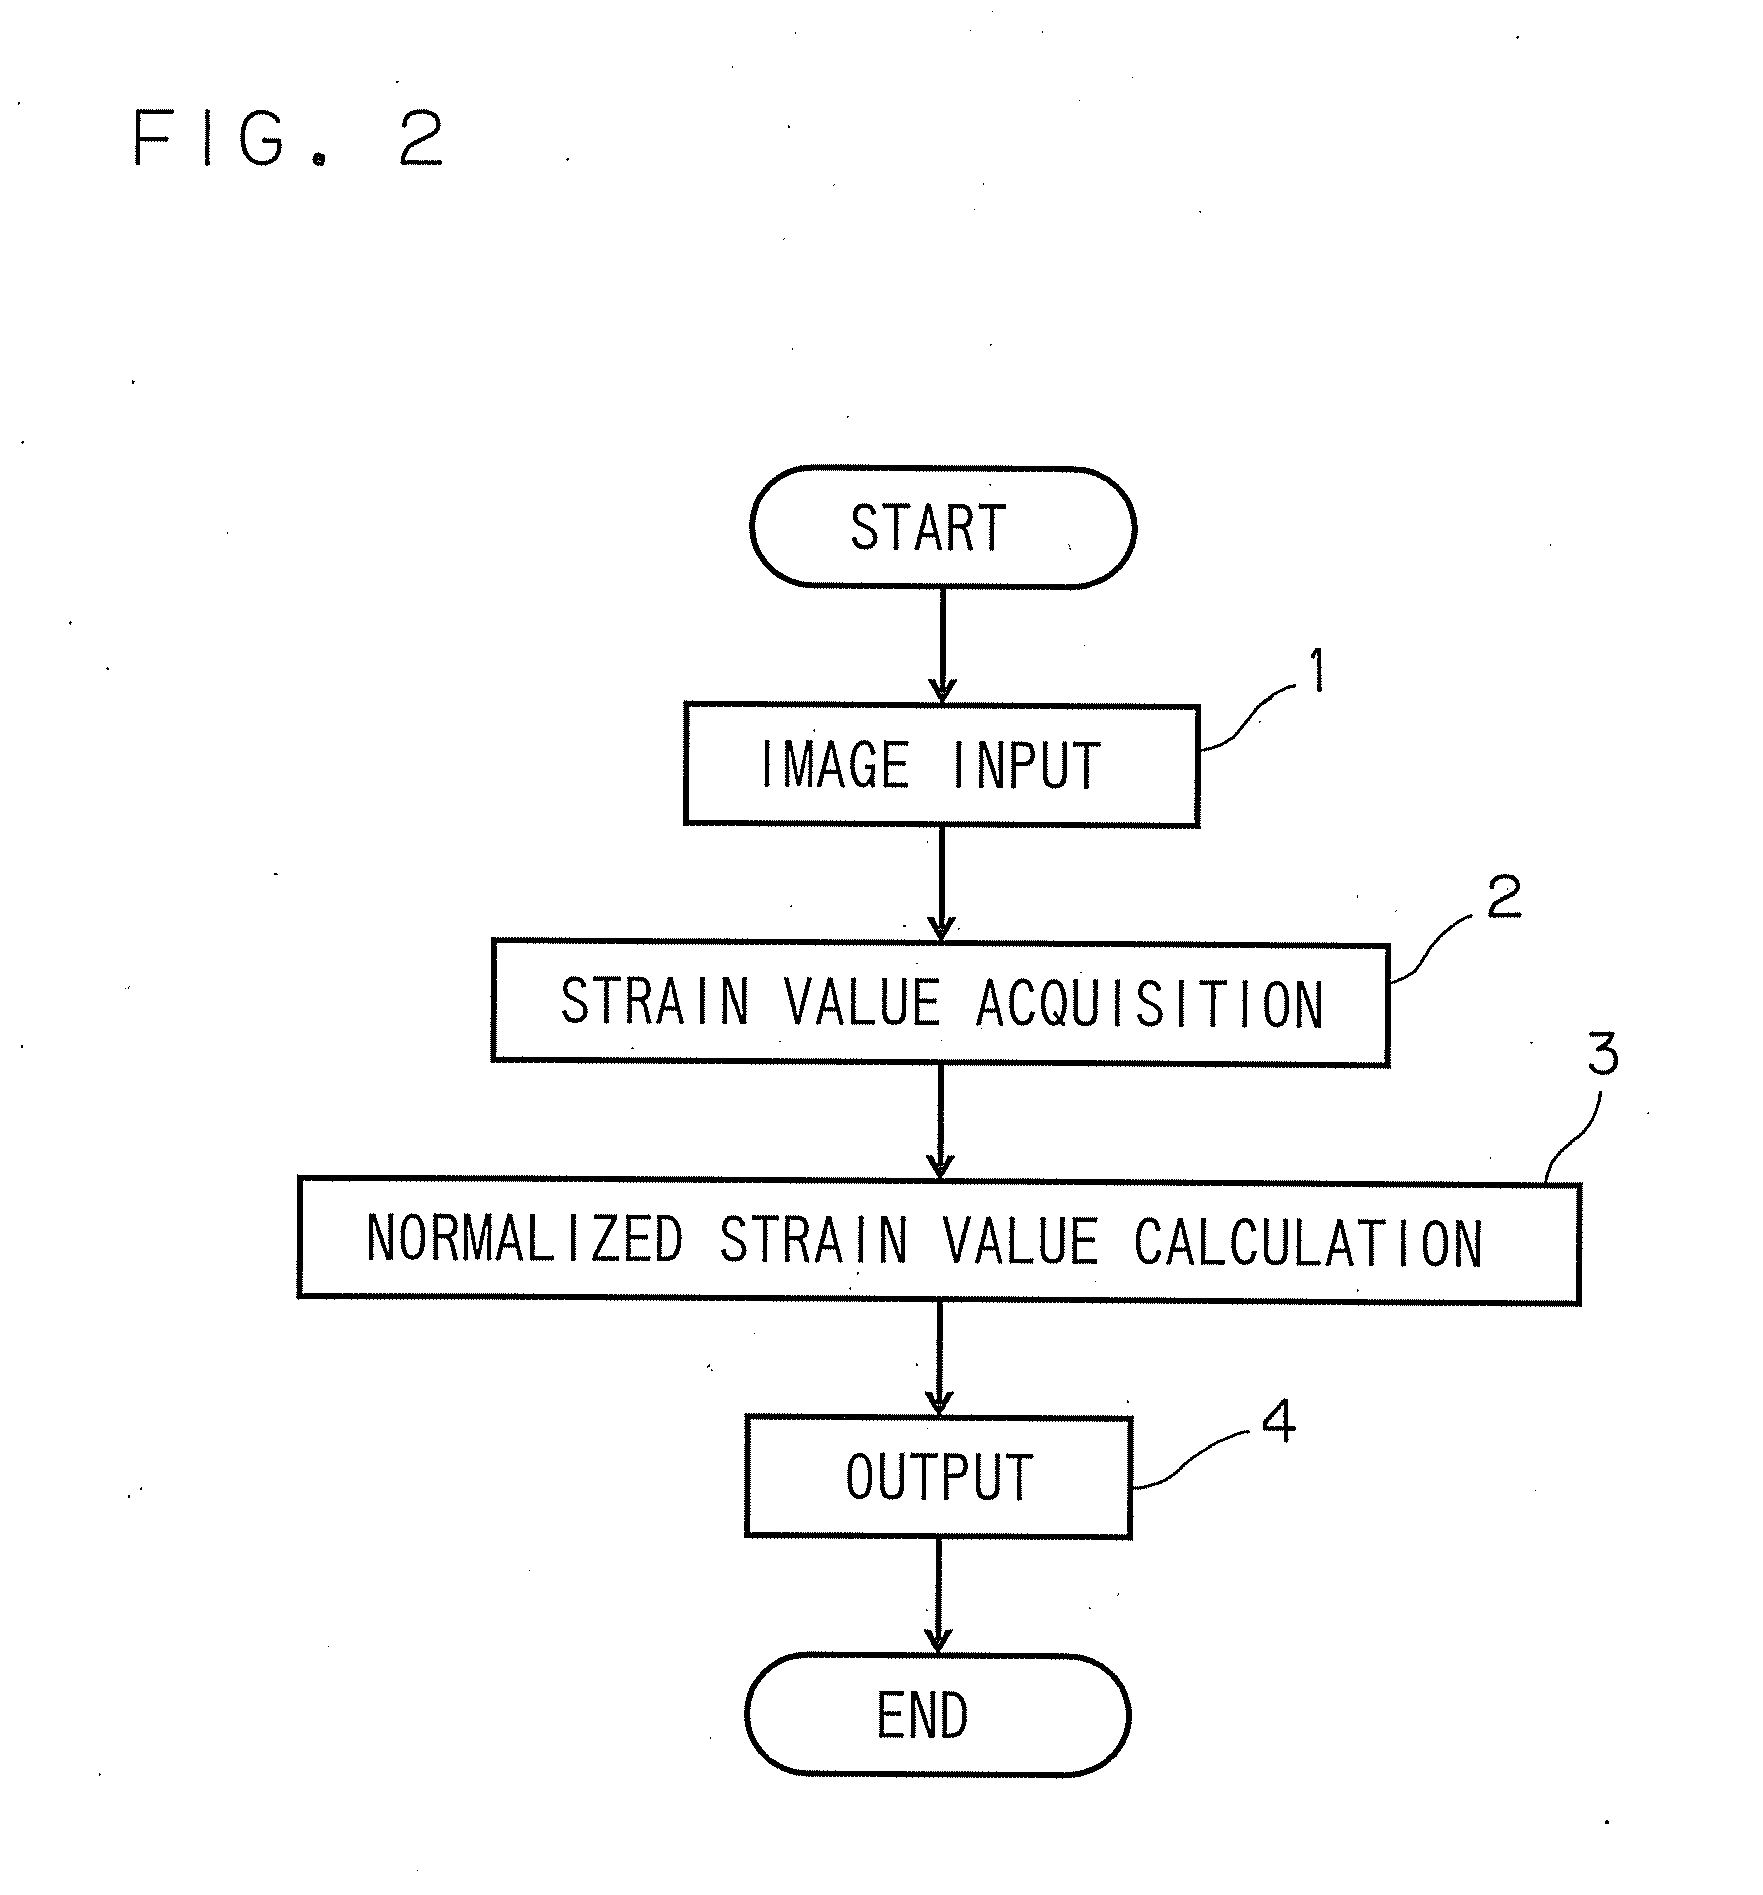 Apparatus and method of heart function analysis